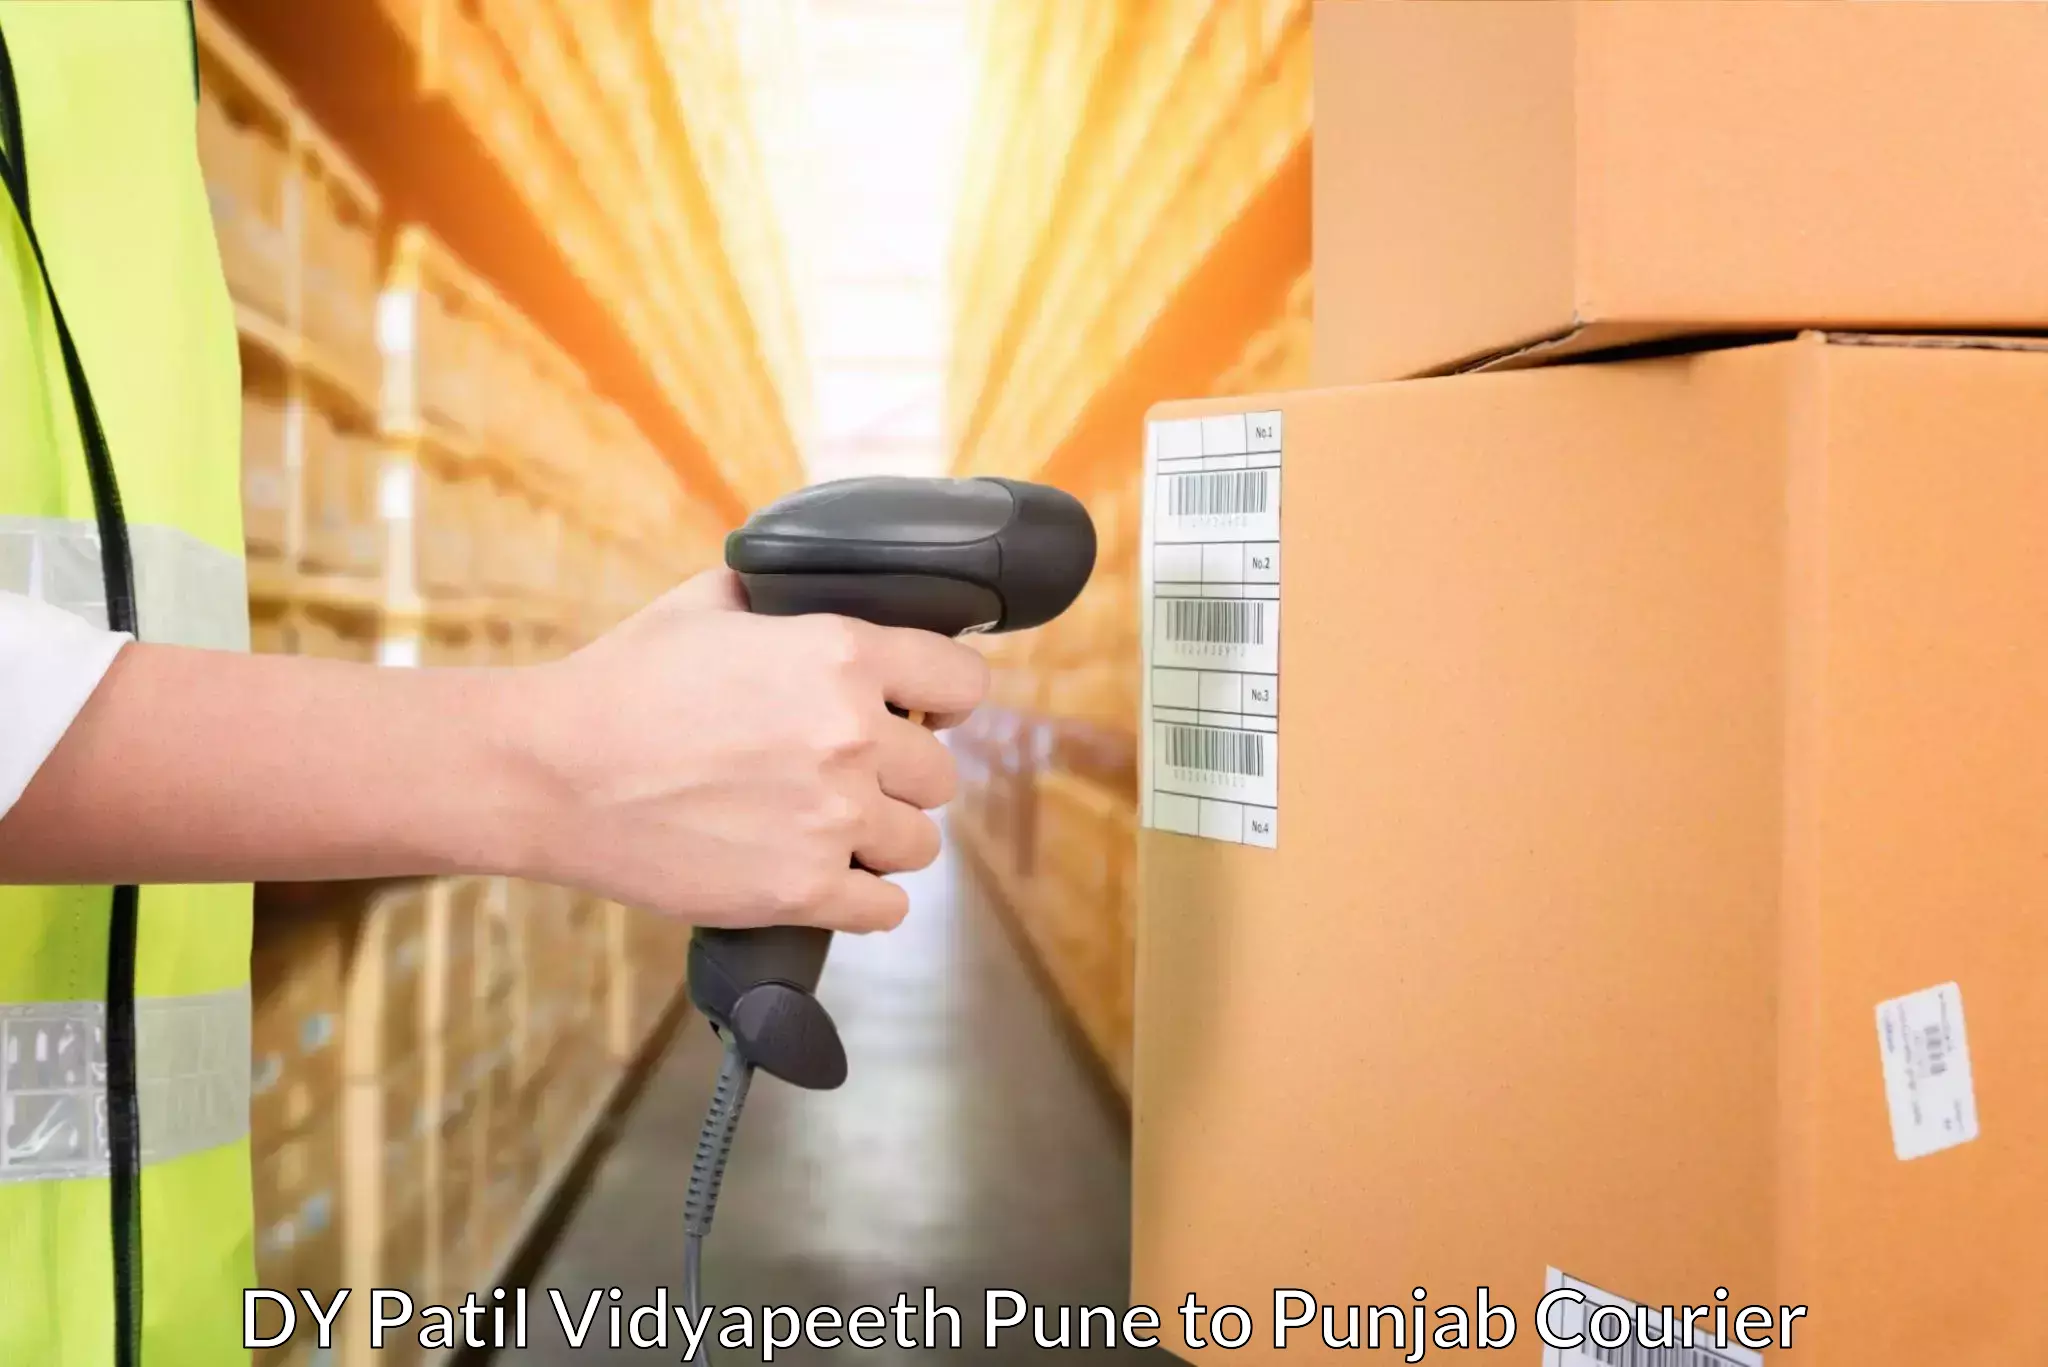 Express delivery solutions DY Patil Vidyapeeth Pune to Khanna